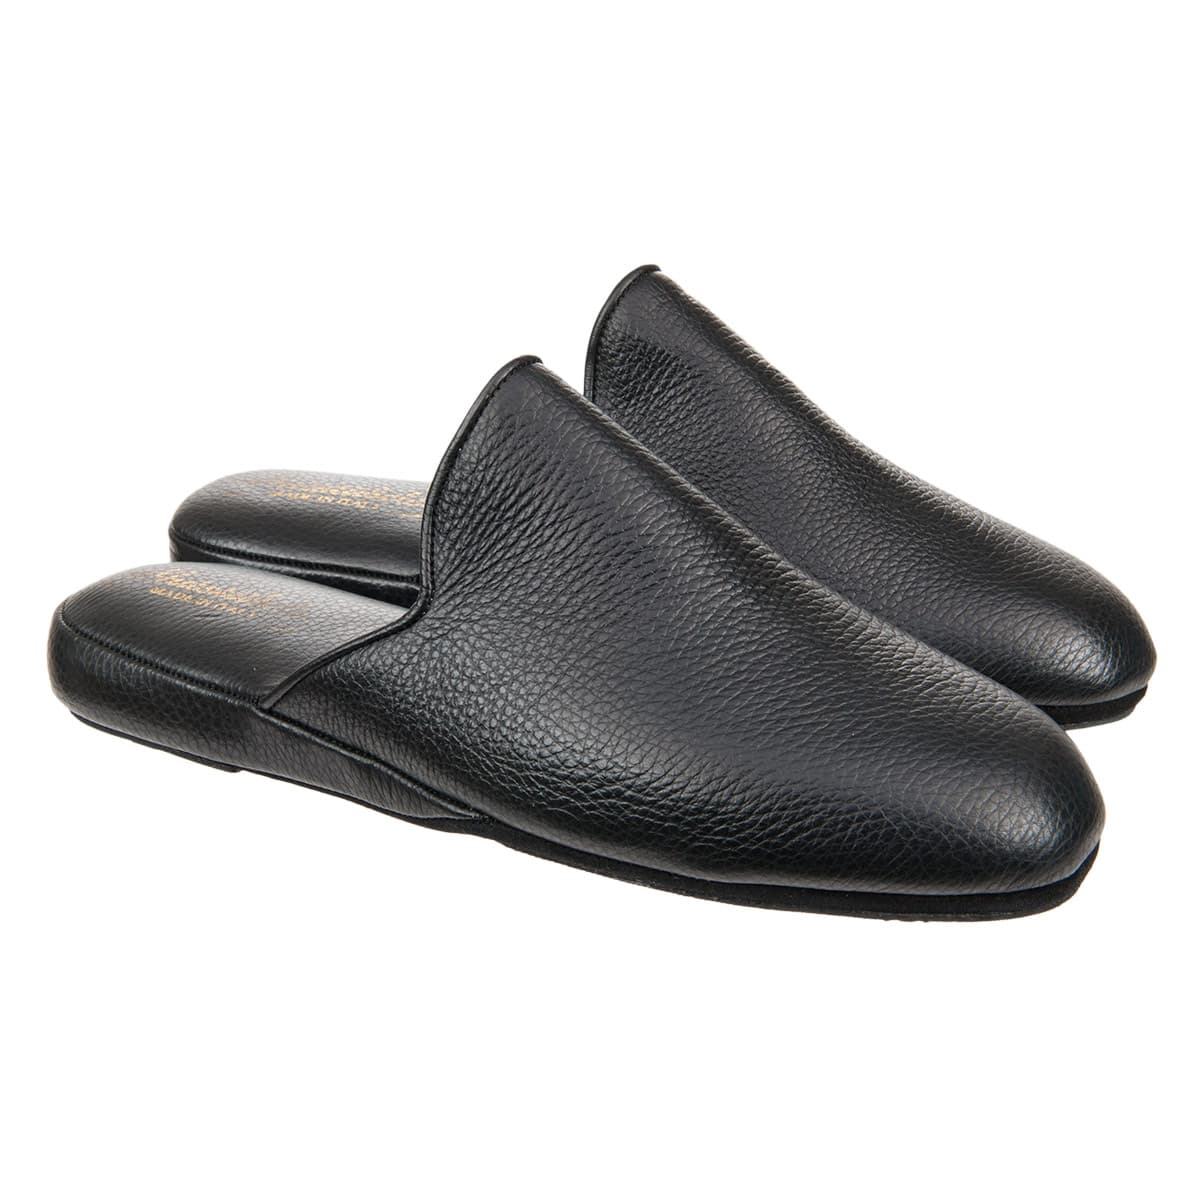 Men's leather slippers with anti slip sole